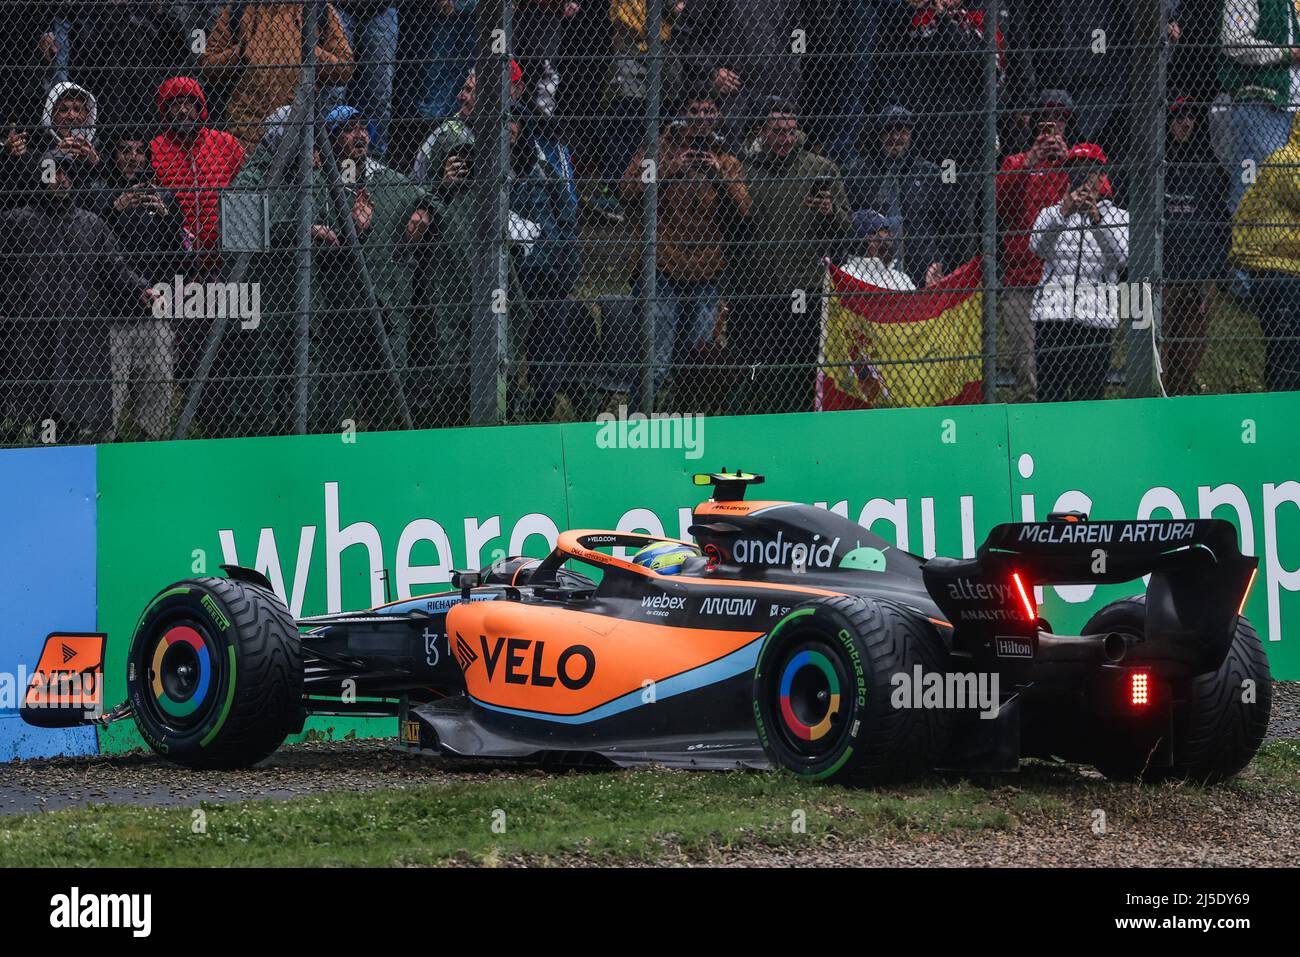 Imola, Italy. 22nd Apr, 2022. Lando Norris (GBR) McLaren MCL36 spins into the gravel during qualifying. 22.04.2022